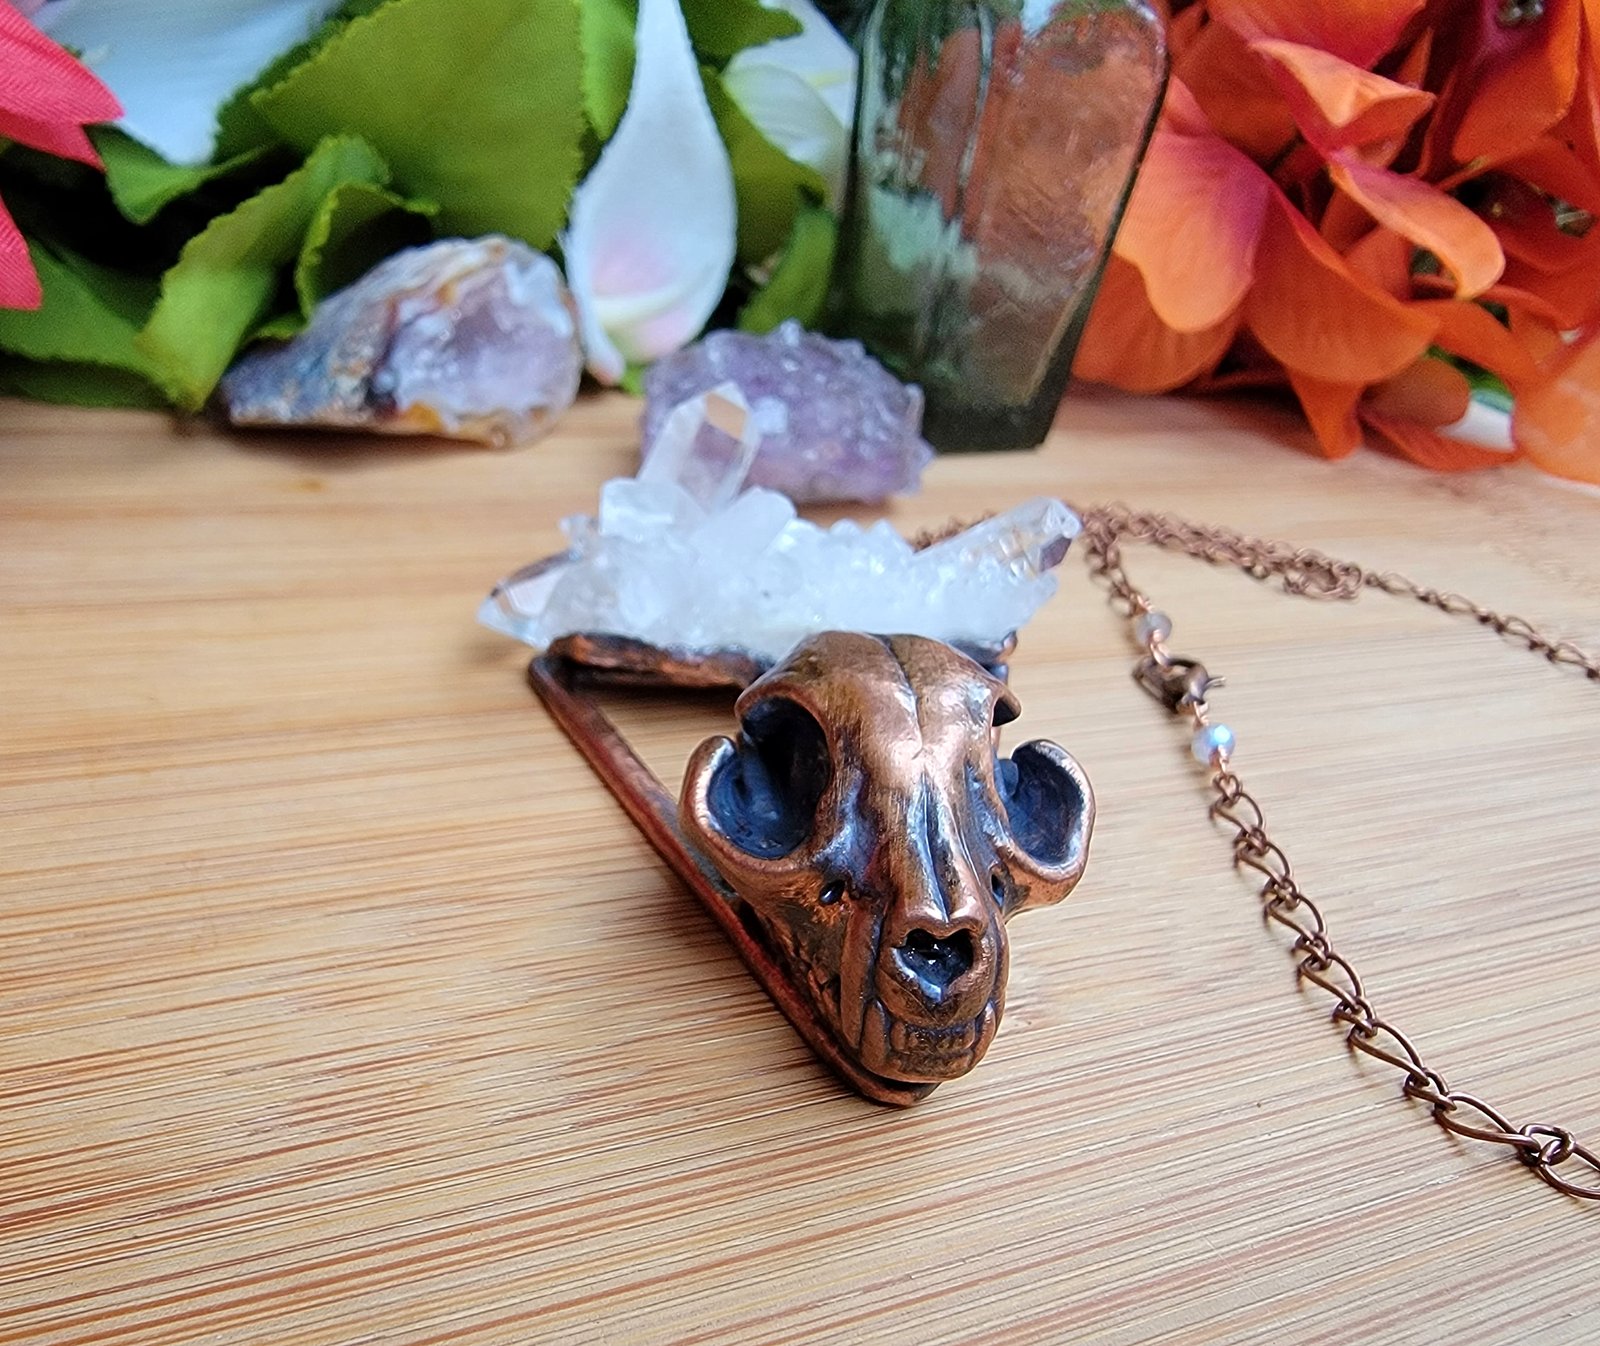 Tips on turning this rat skull into a necklace pendant? : r/Taxidermy